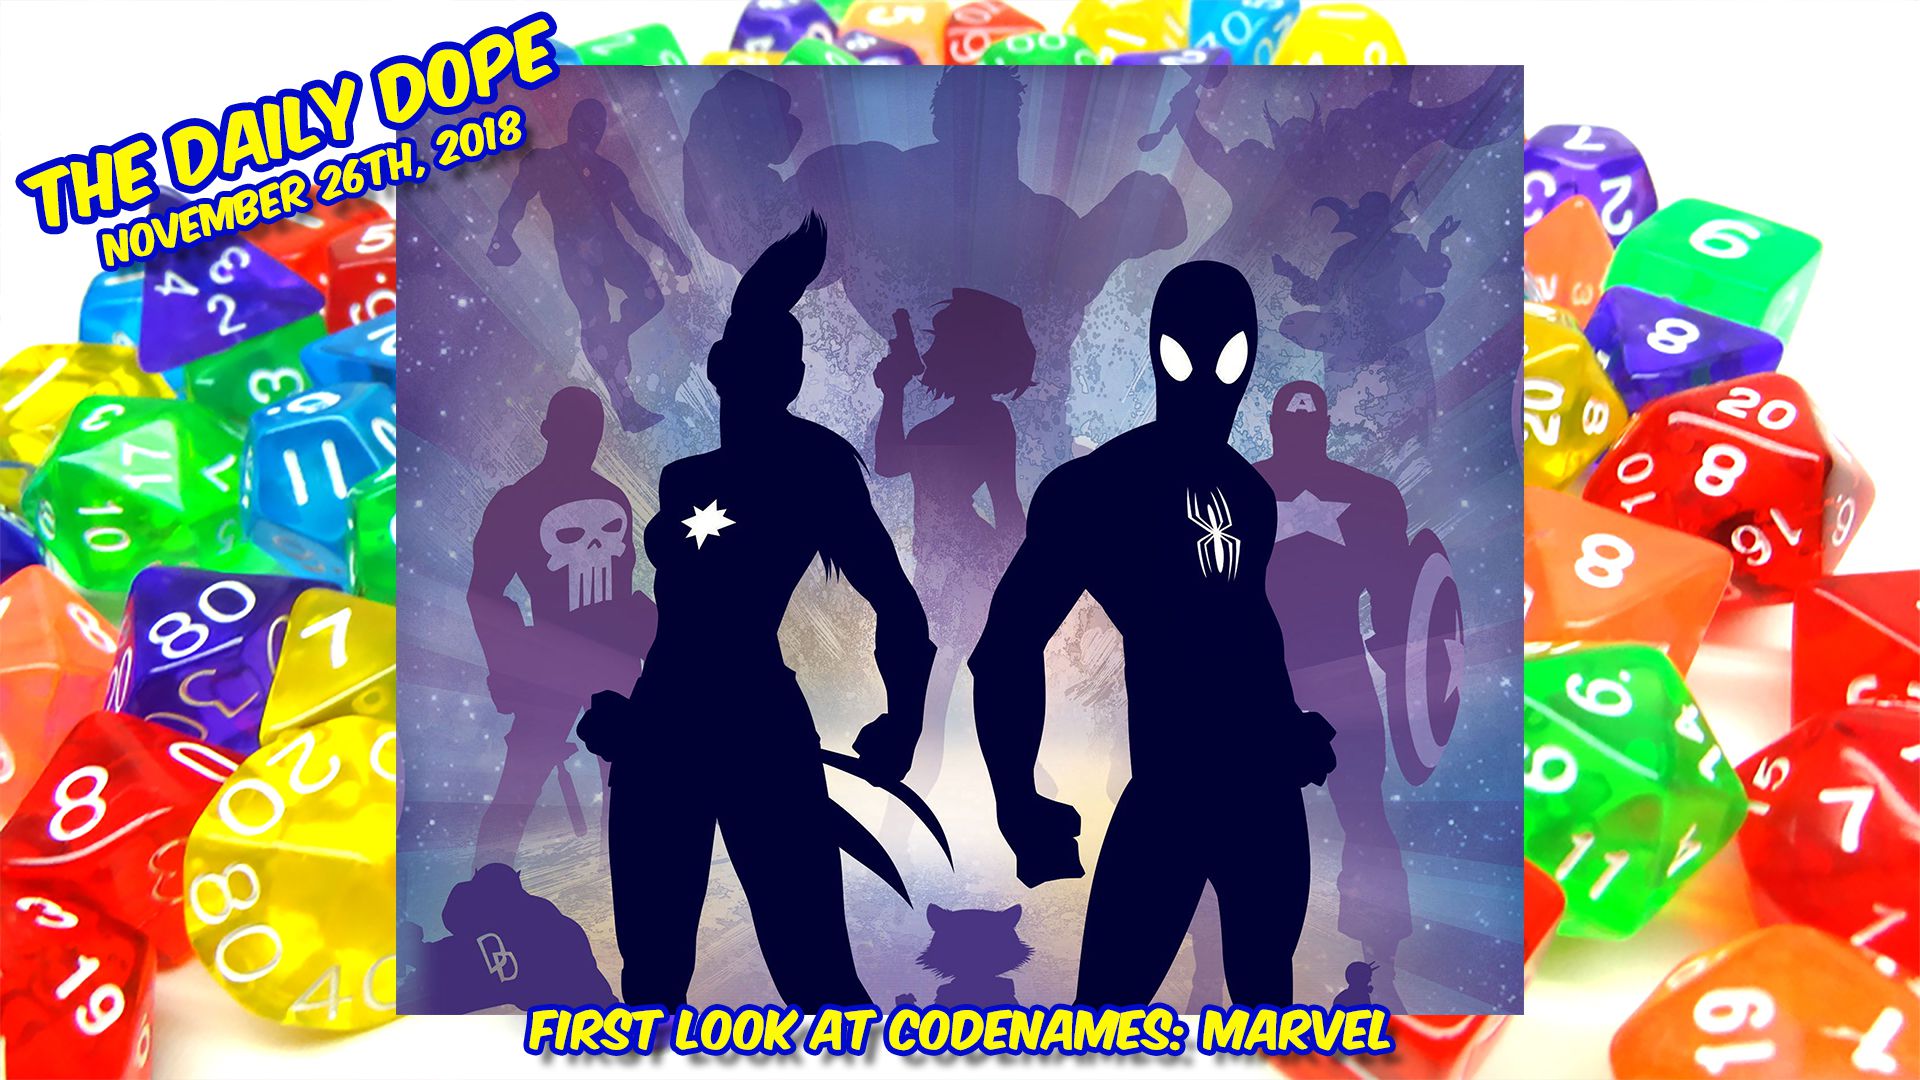 First Look at 'Codenames Marvel' on The Daily Dope for